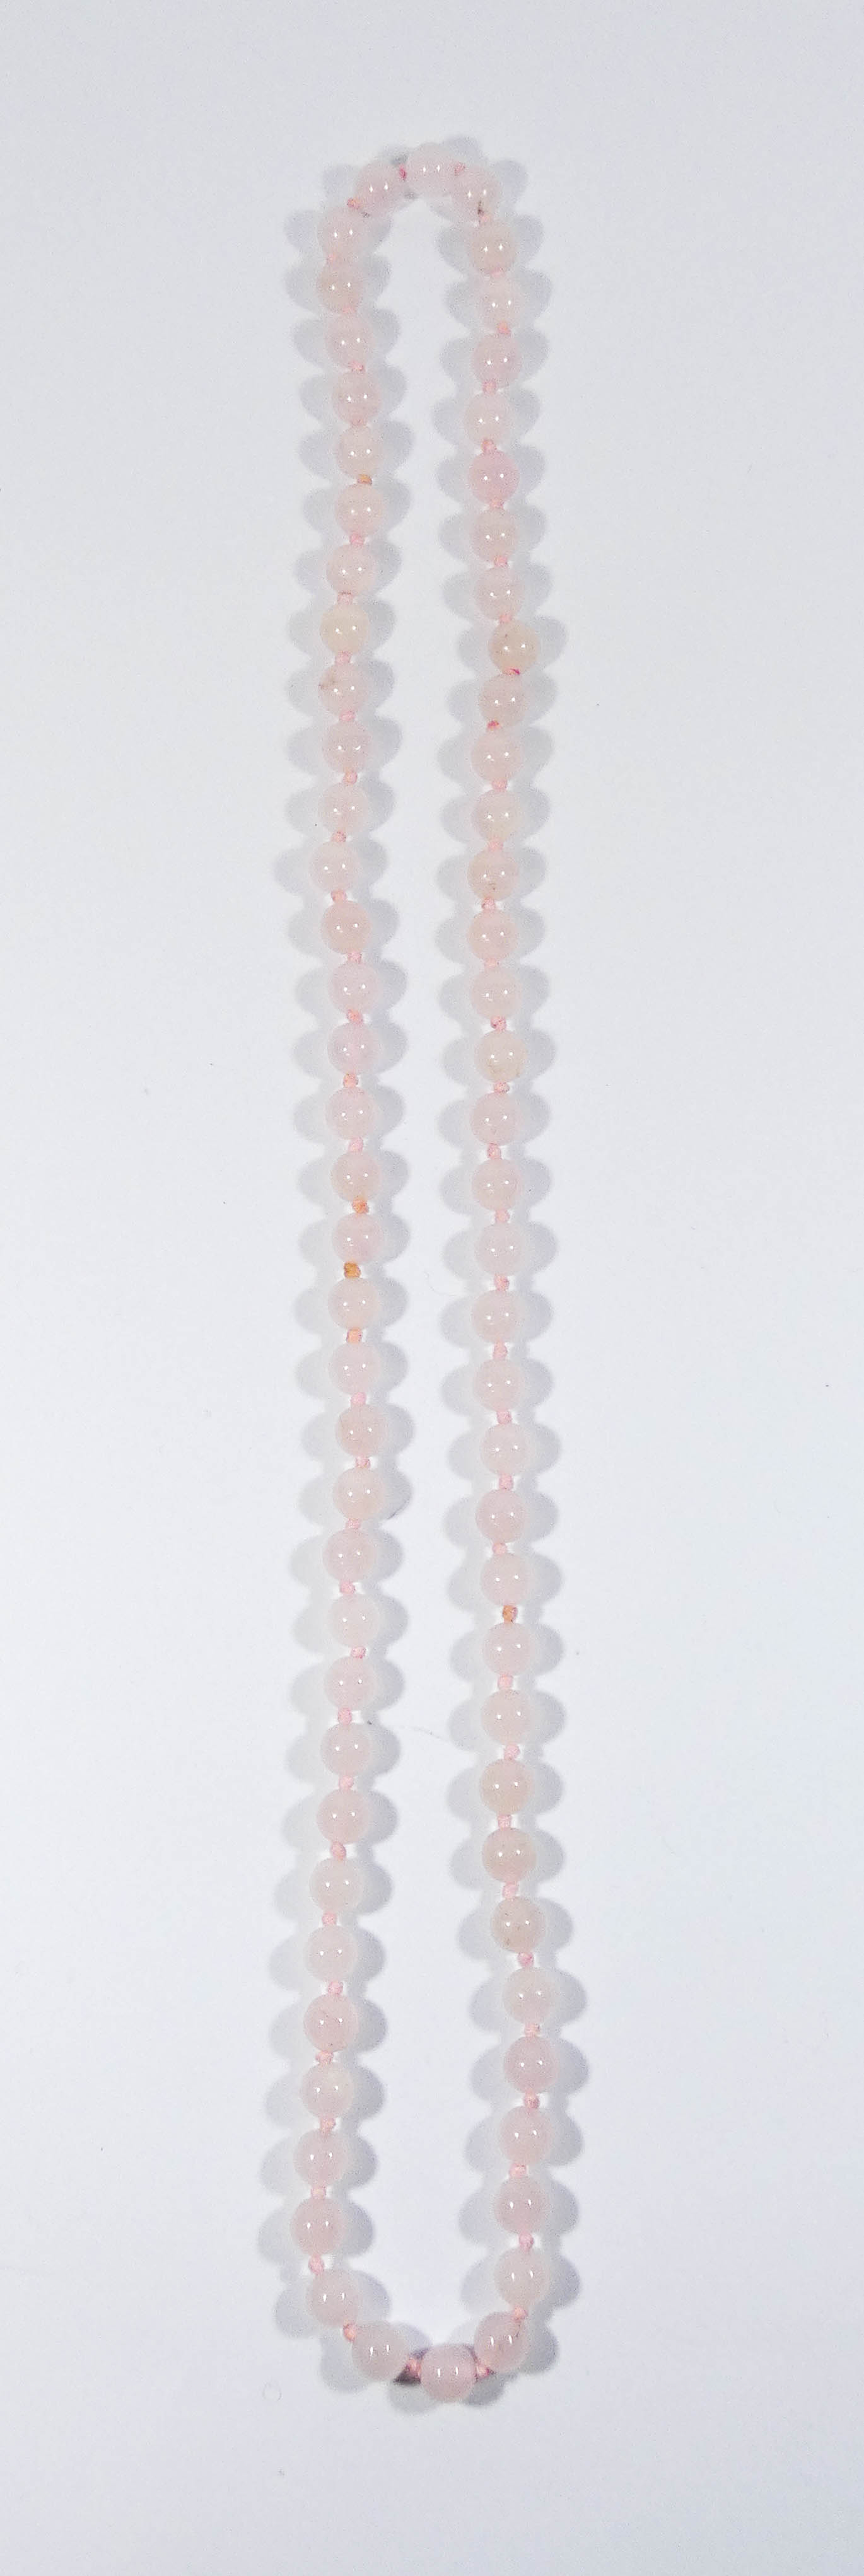 Row of rose quartz beads and a row of hematite and freshwater pearl beads - Image 3 of 3